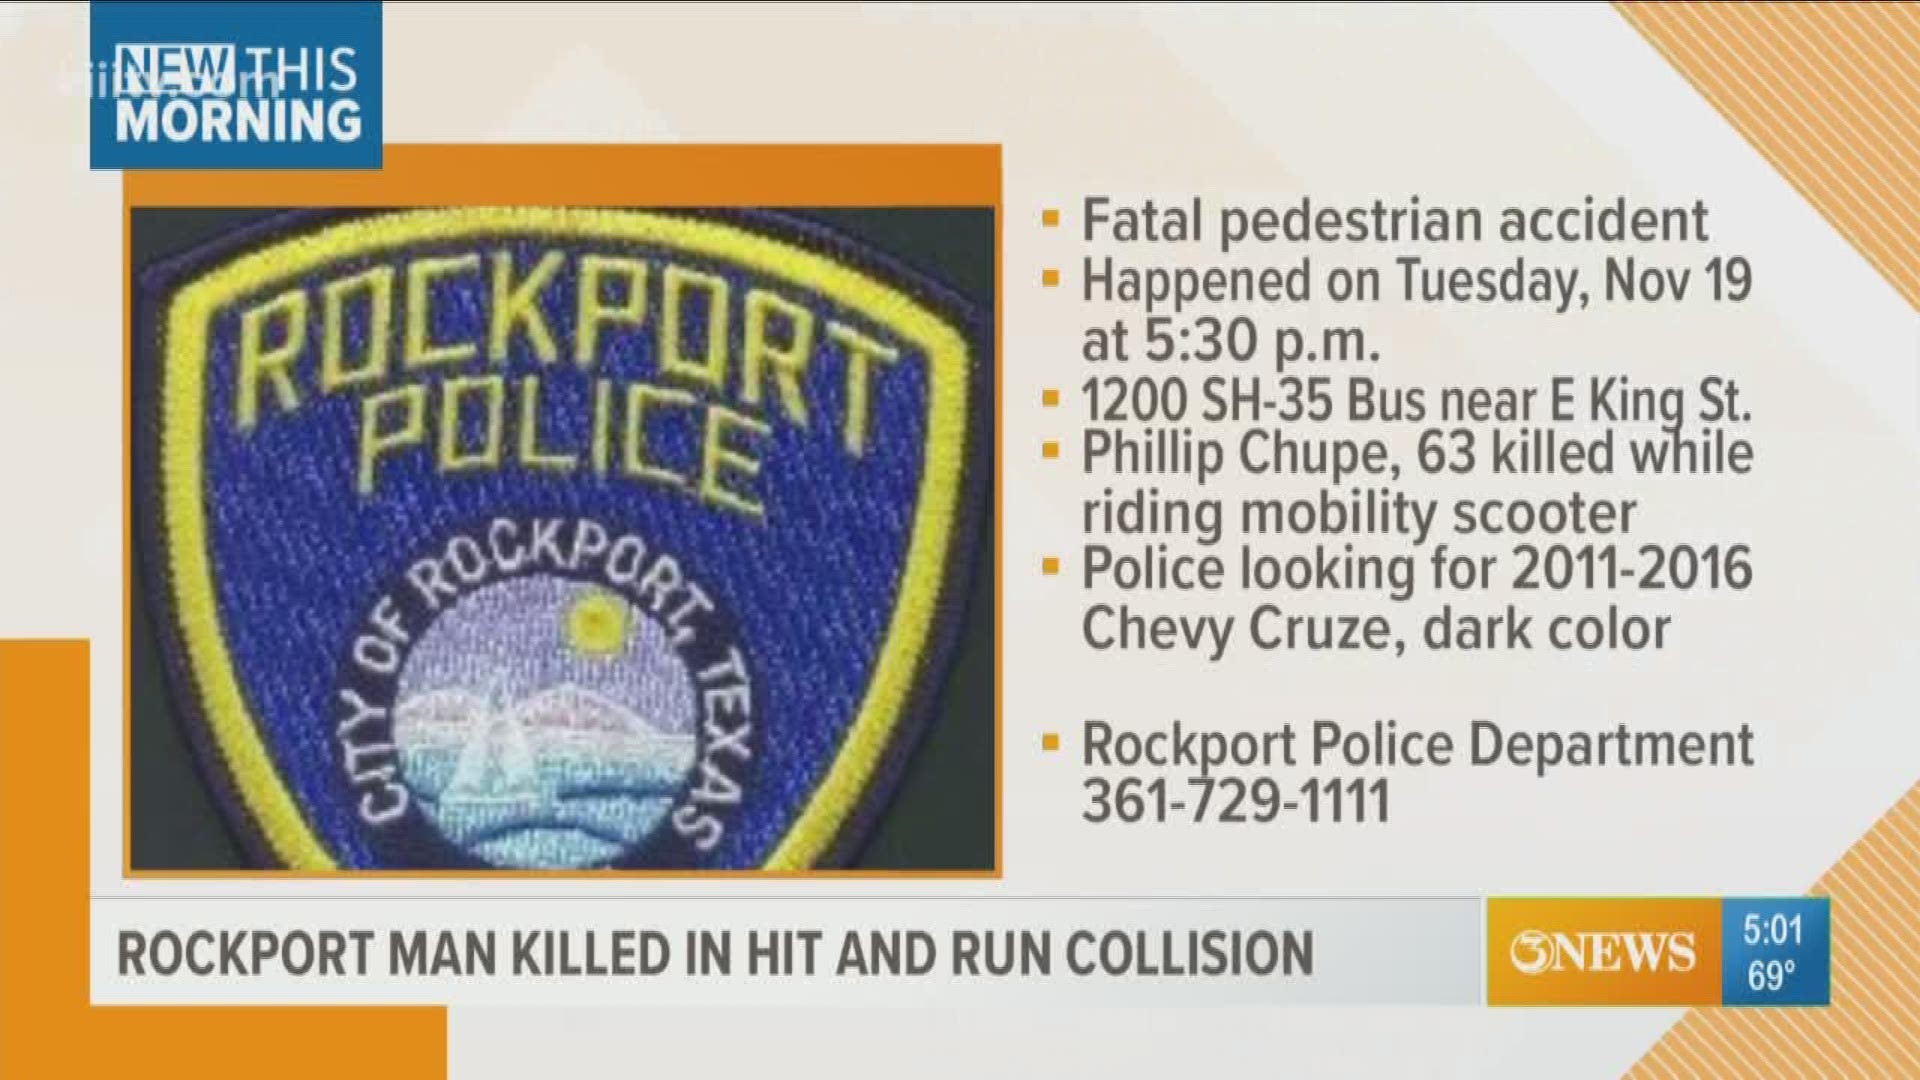 The man was struck in the roadway while operating a mobility scooter.